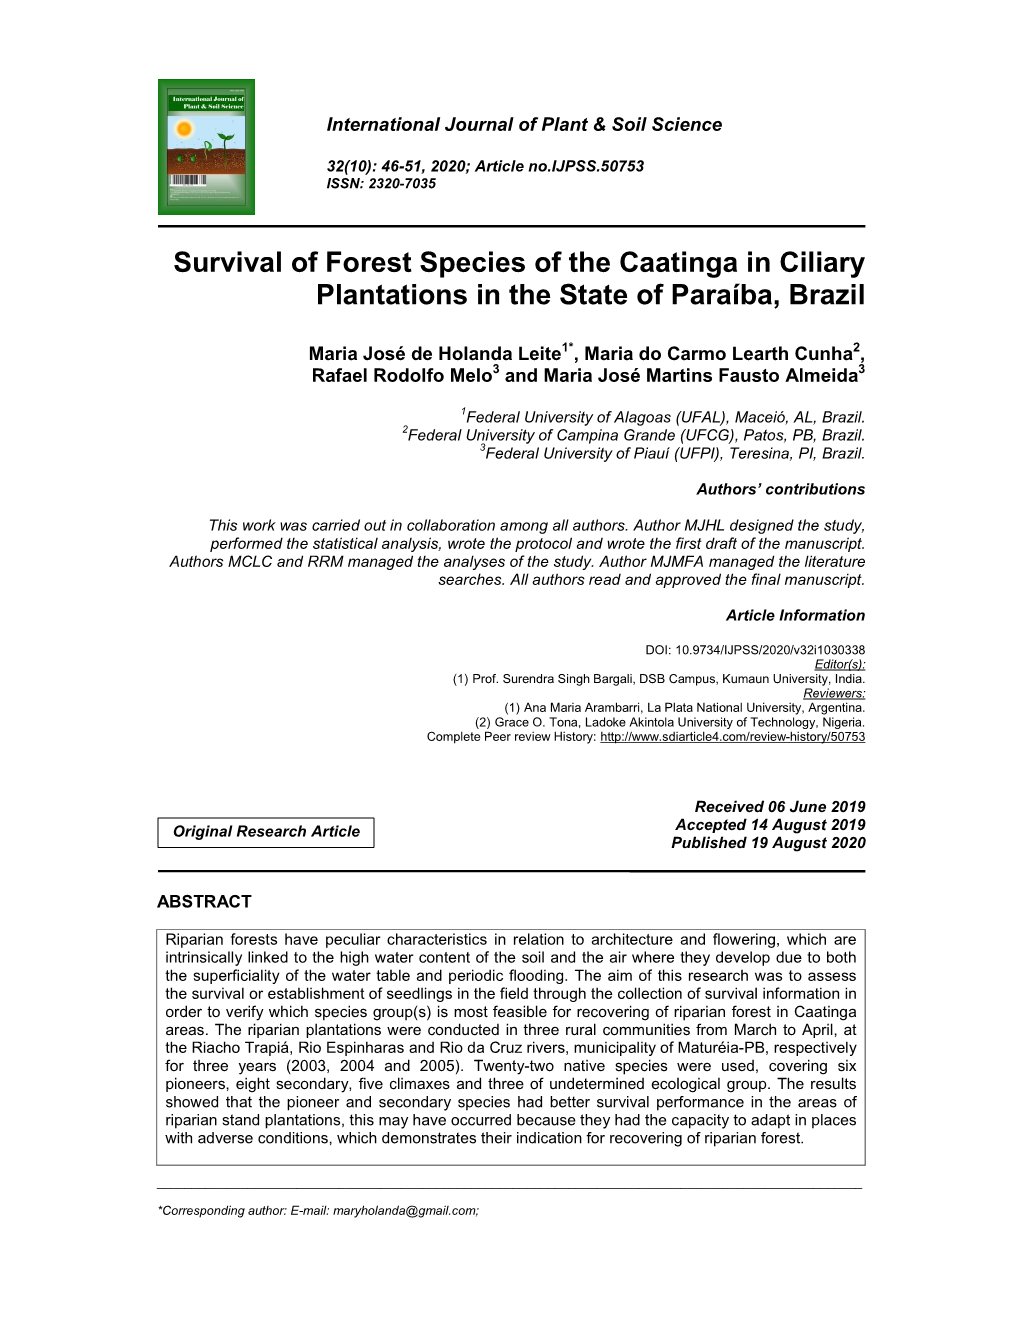 Survival of Forest Species of the Caatinga in Ciliary Plantations in the State of Paraíba, Brazil